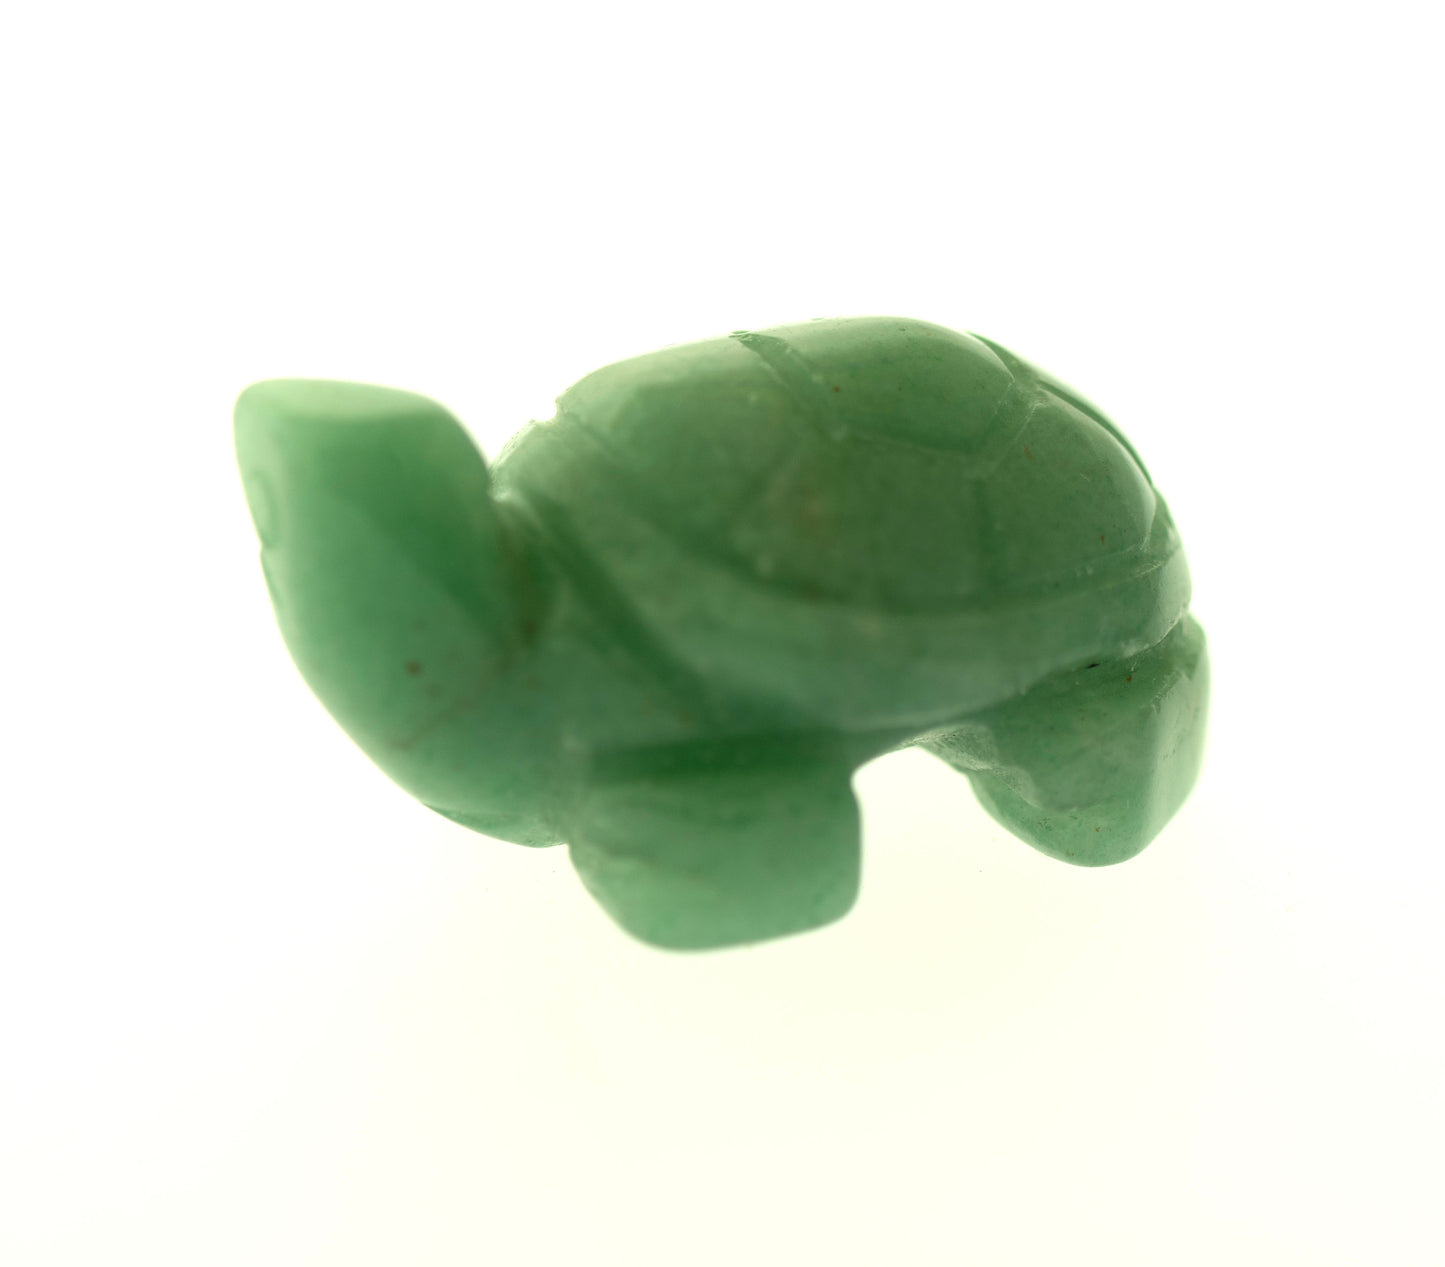 
                  
                    A small green turtle figurine made of jade, it stands among a collection of Carved Turtle Gemstone Figures, displayed on a plain white background.
                  
                